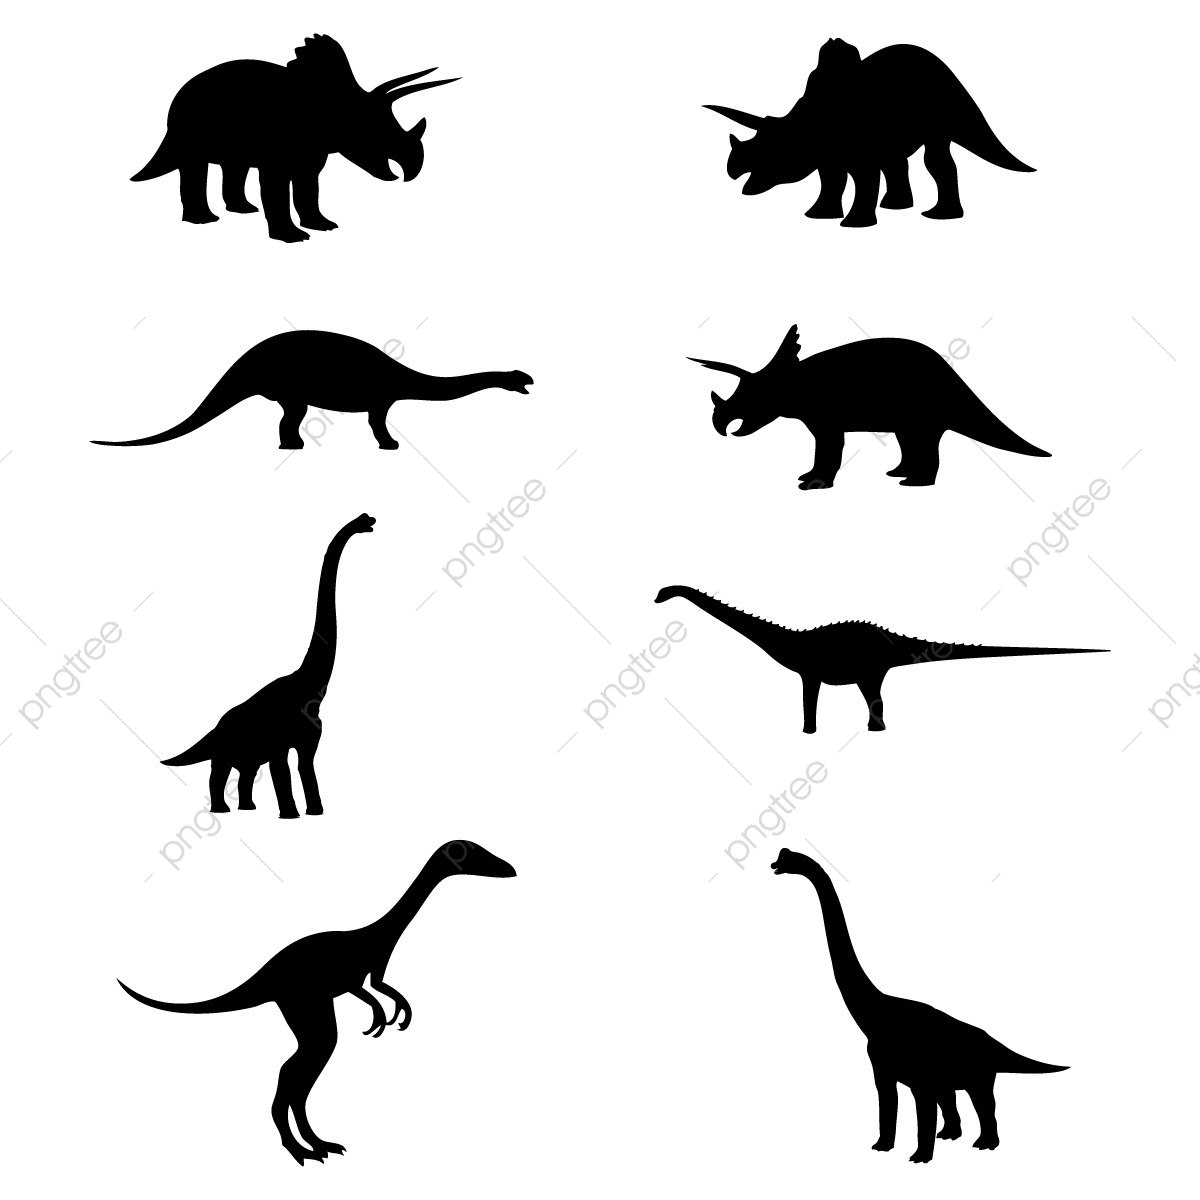 Download Dinosaur Silhouette Vector at Vectorified.com | Collection ...